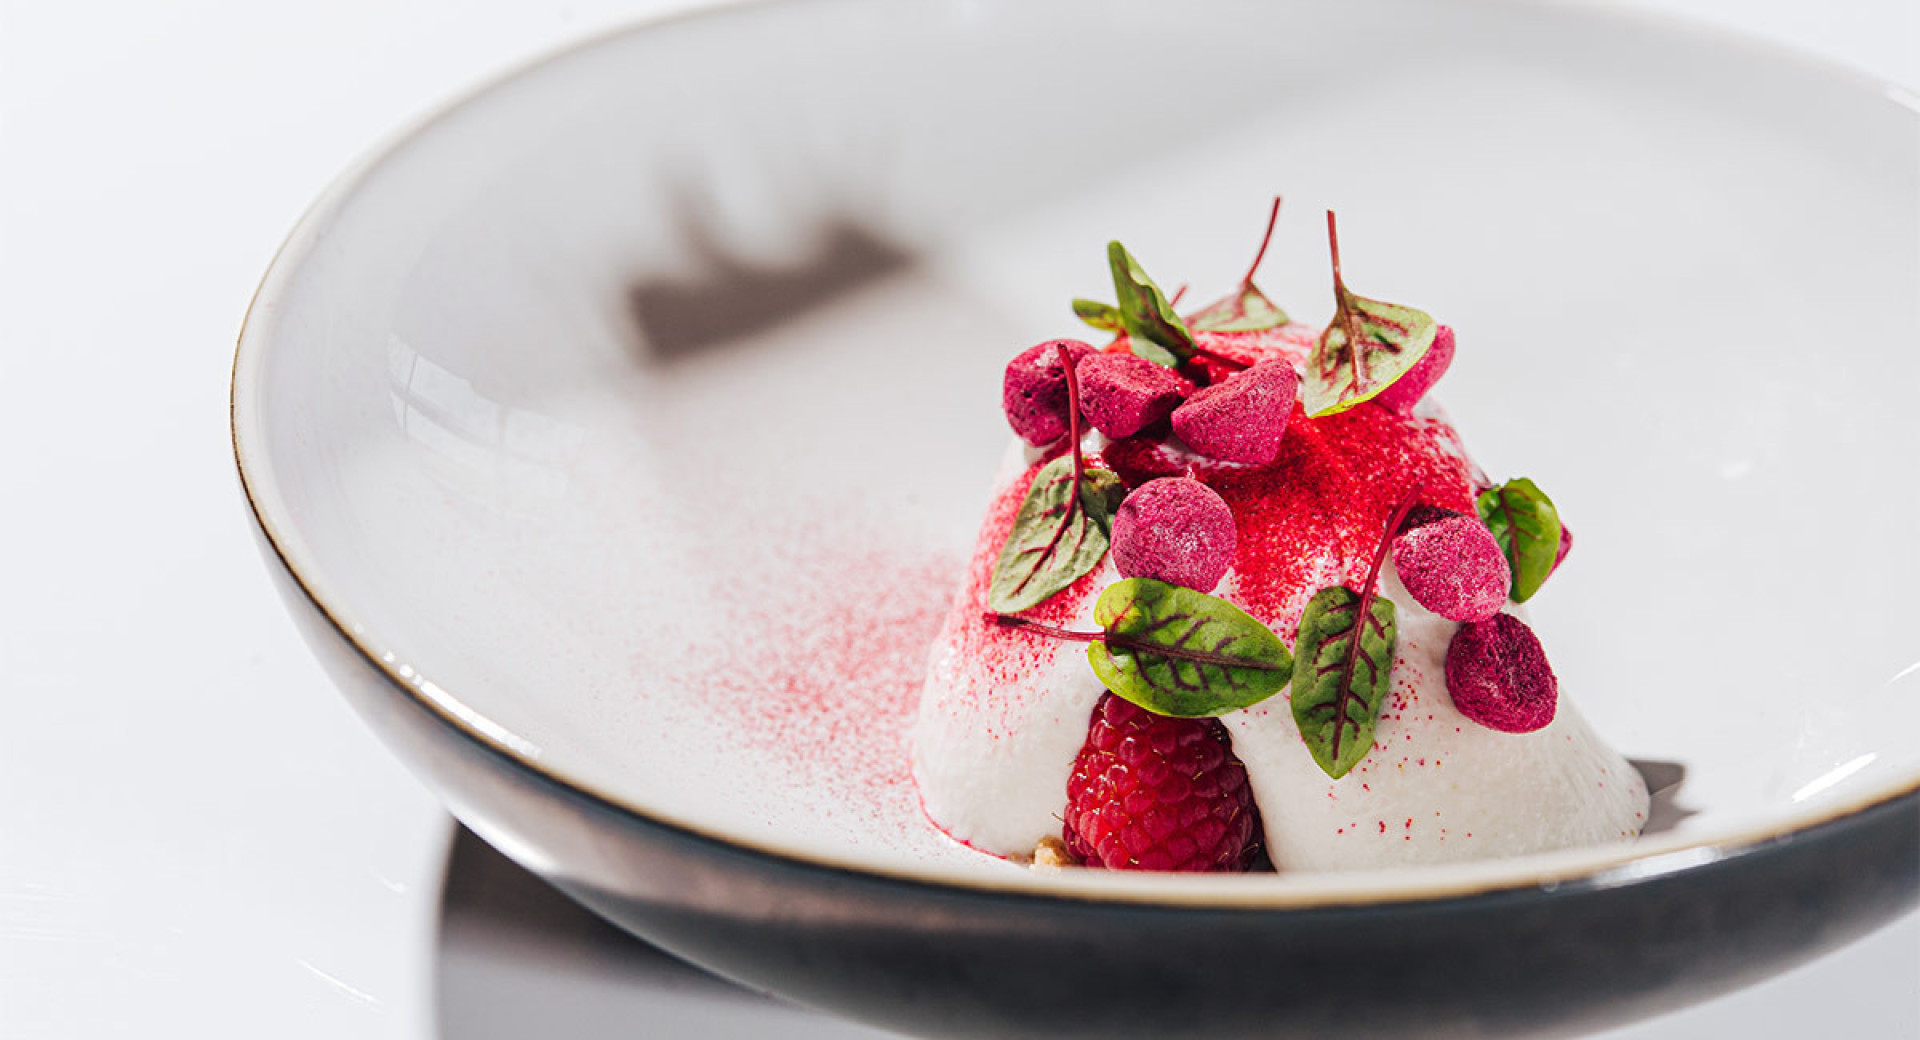  A white mousse on a deep plate, garnished with raspberries and green leaves. White background.